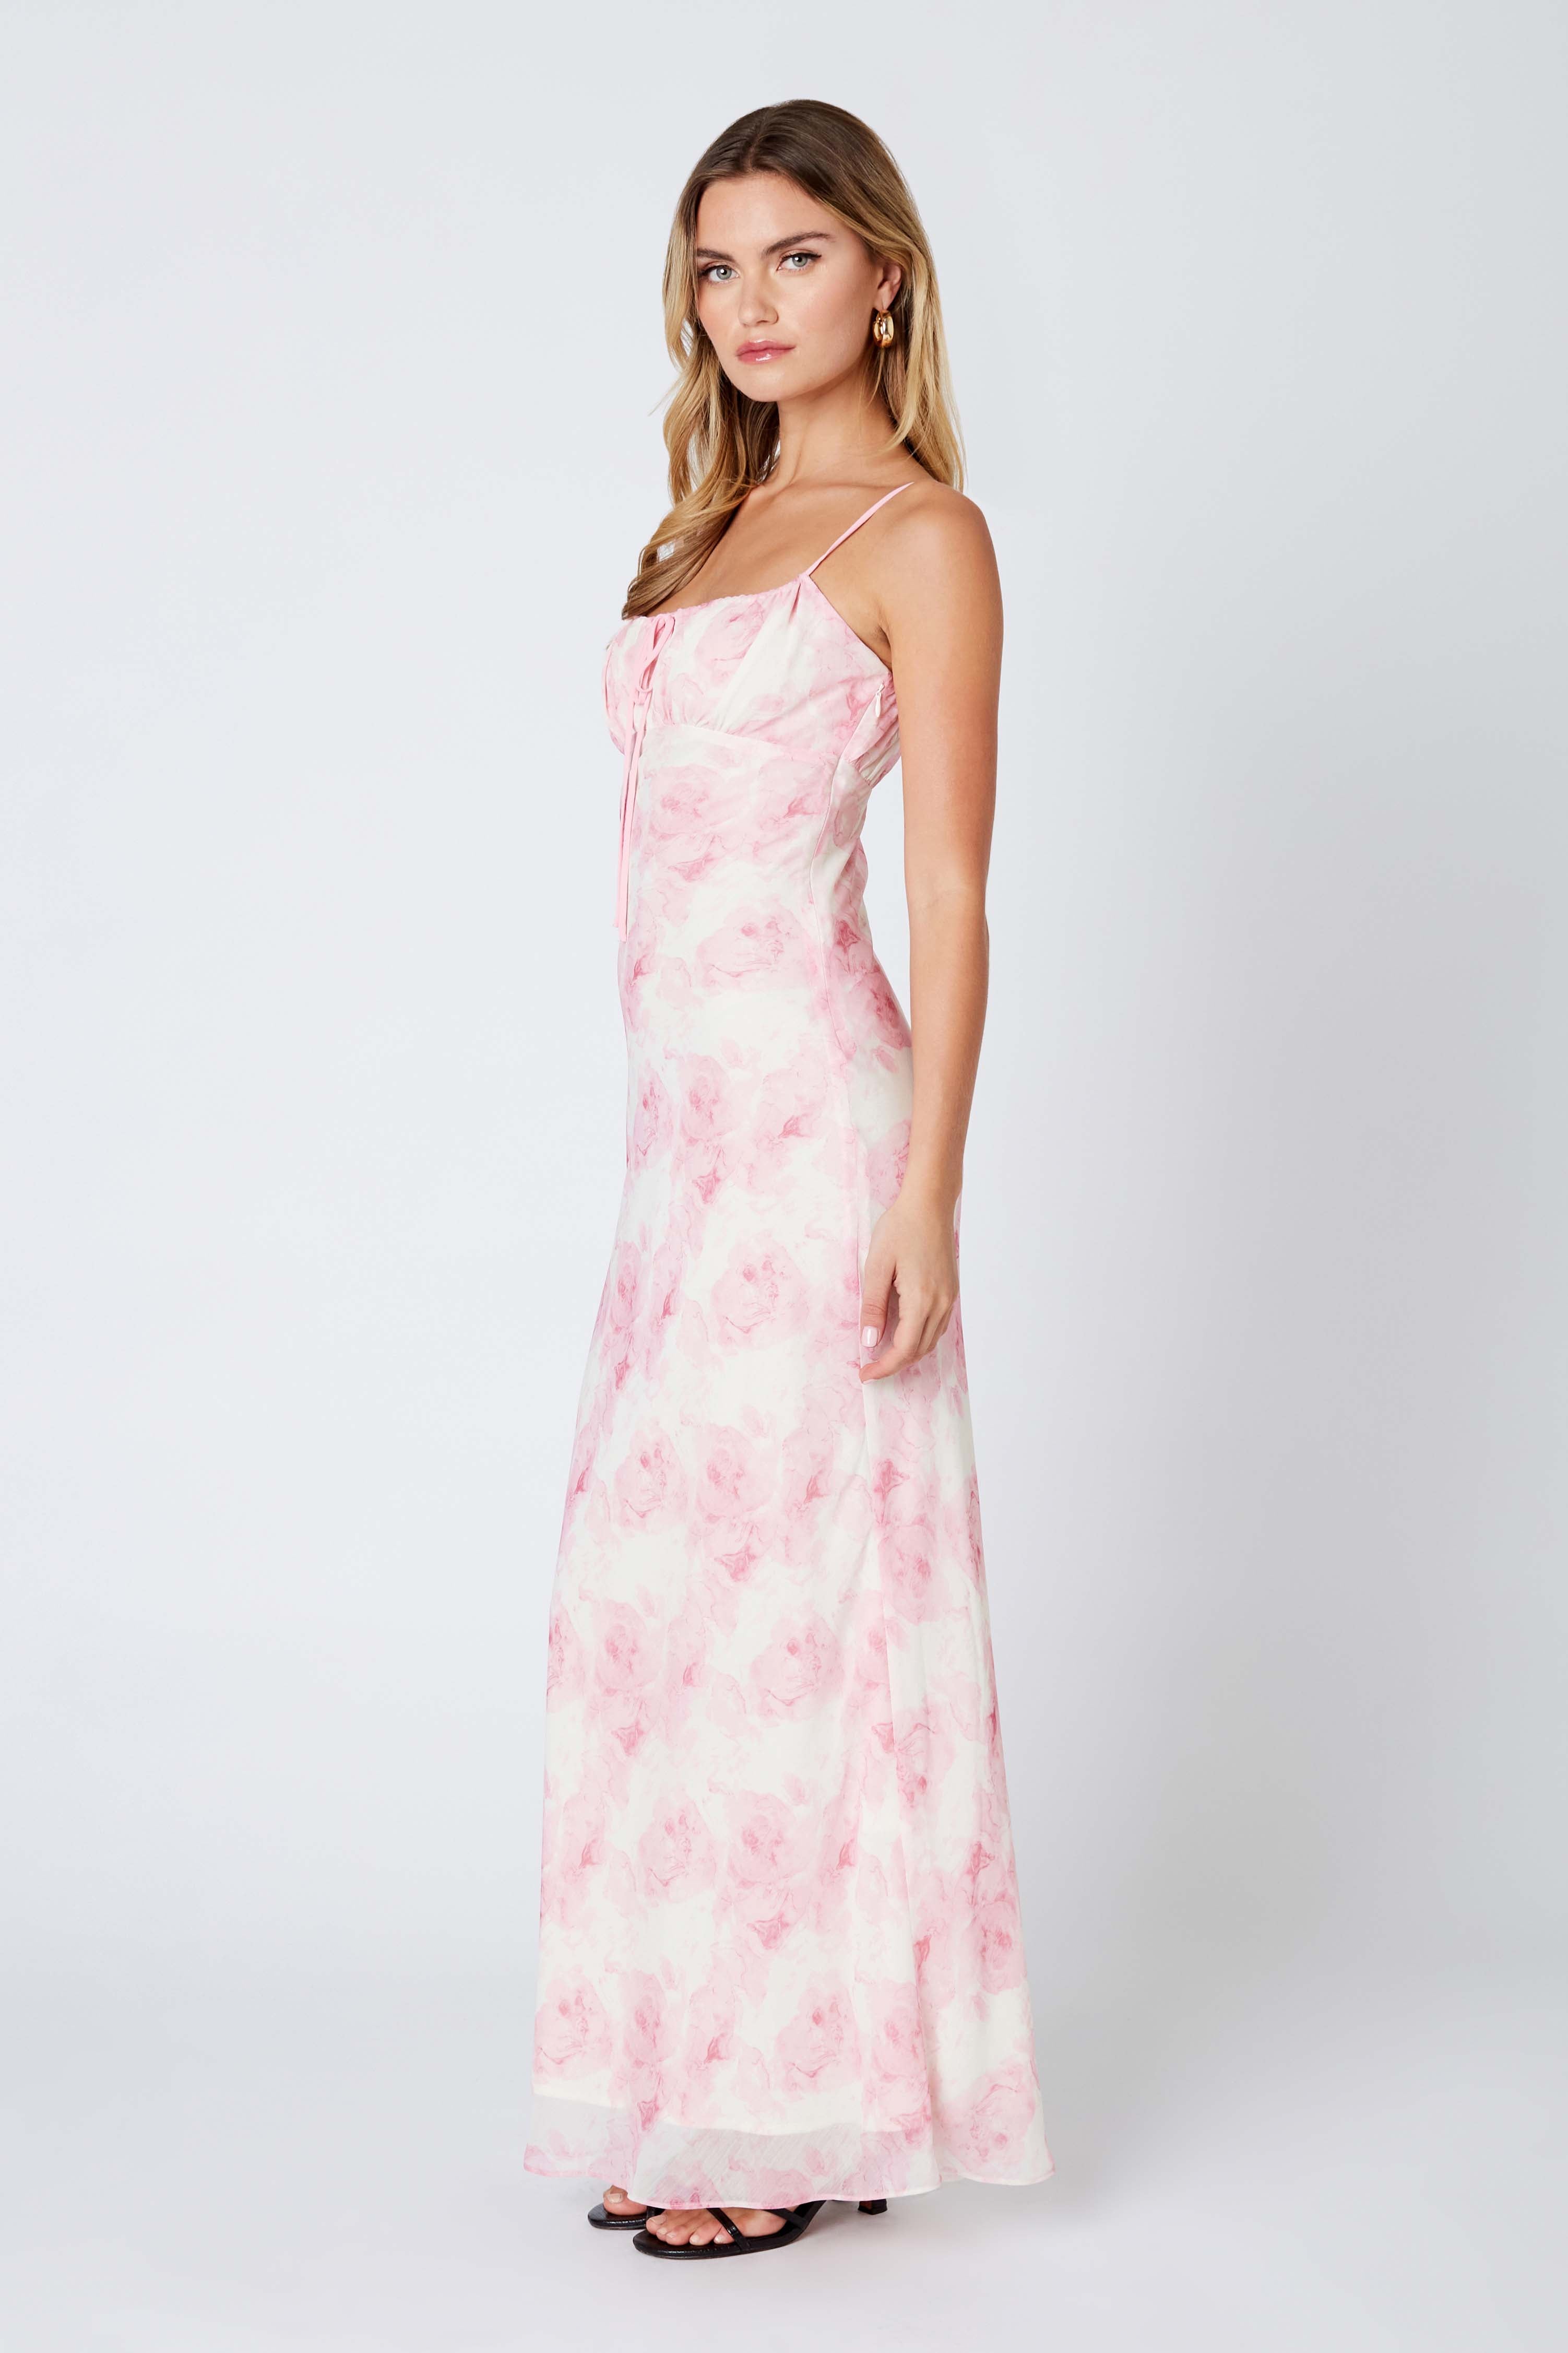 Floral Maxi Dress in Cameo Pink Side View